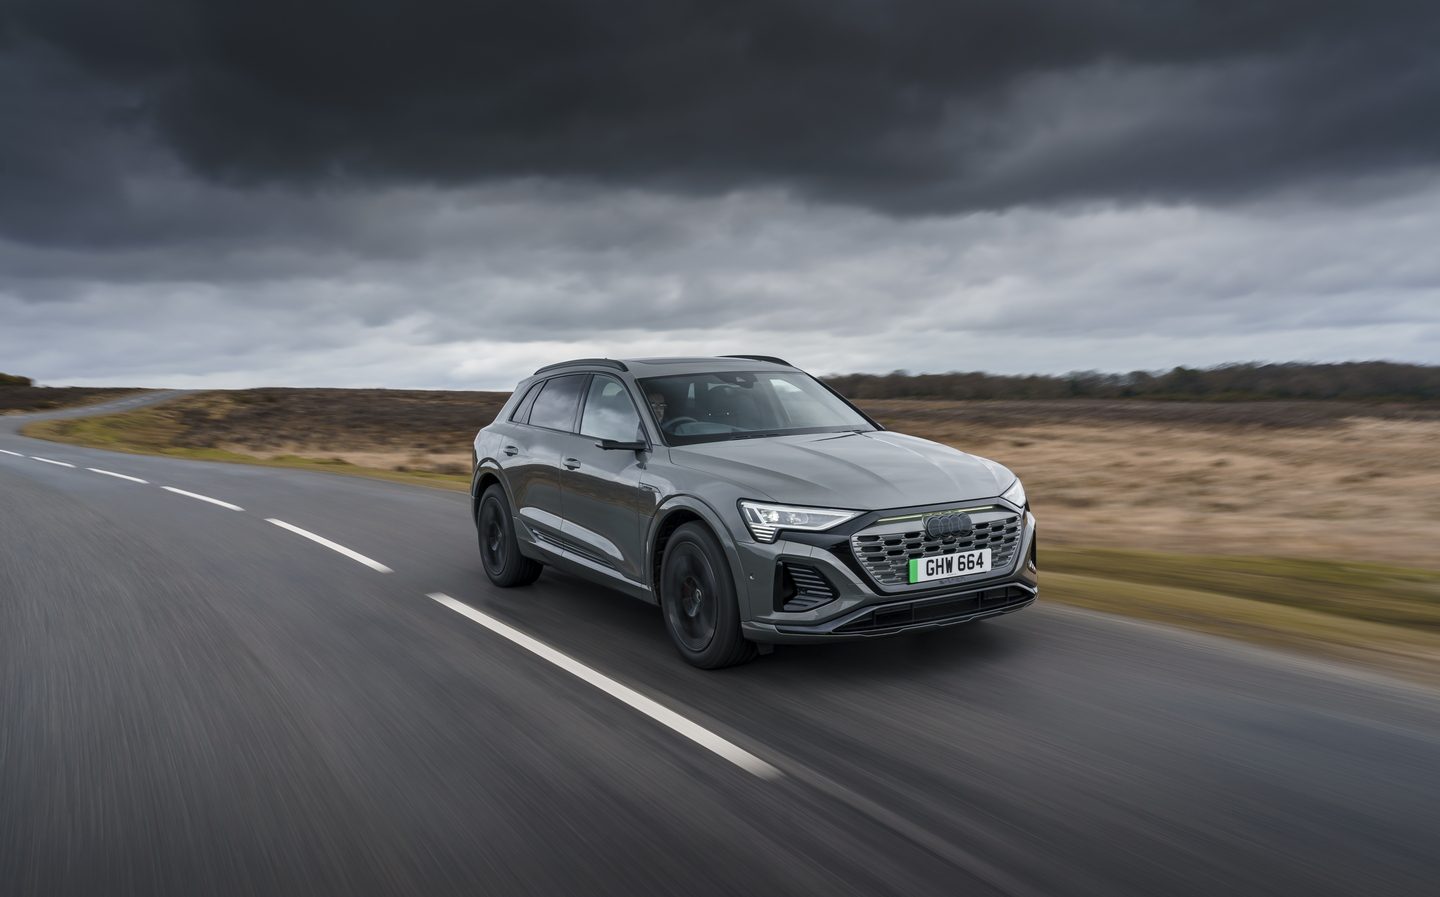 2023 Audi Q8 E-Tron Revealed With Larger Battery, New Family Face